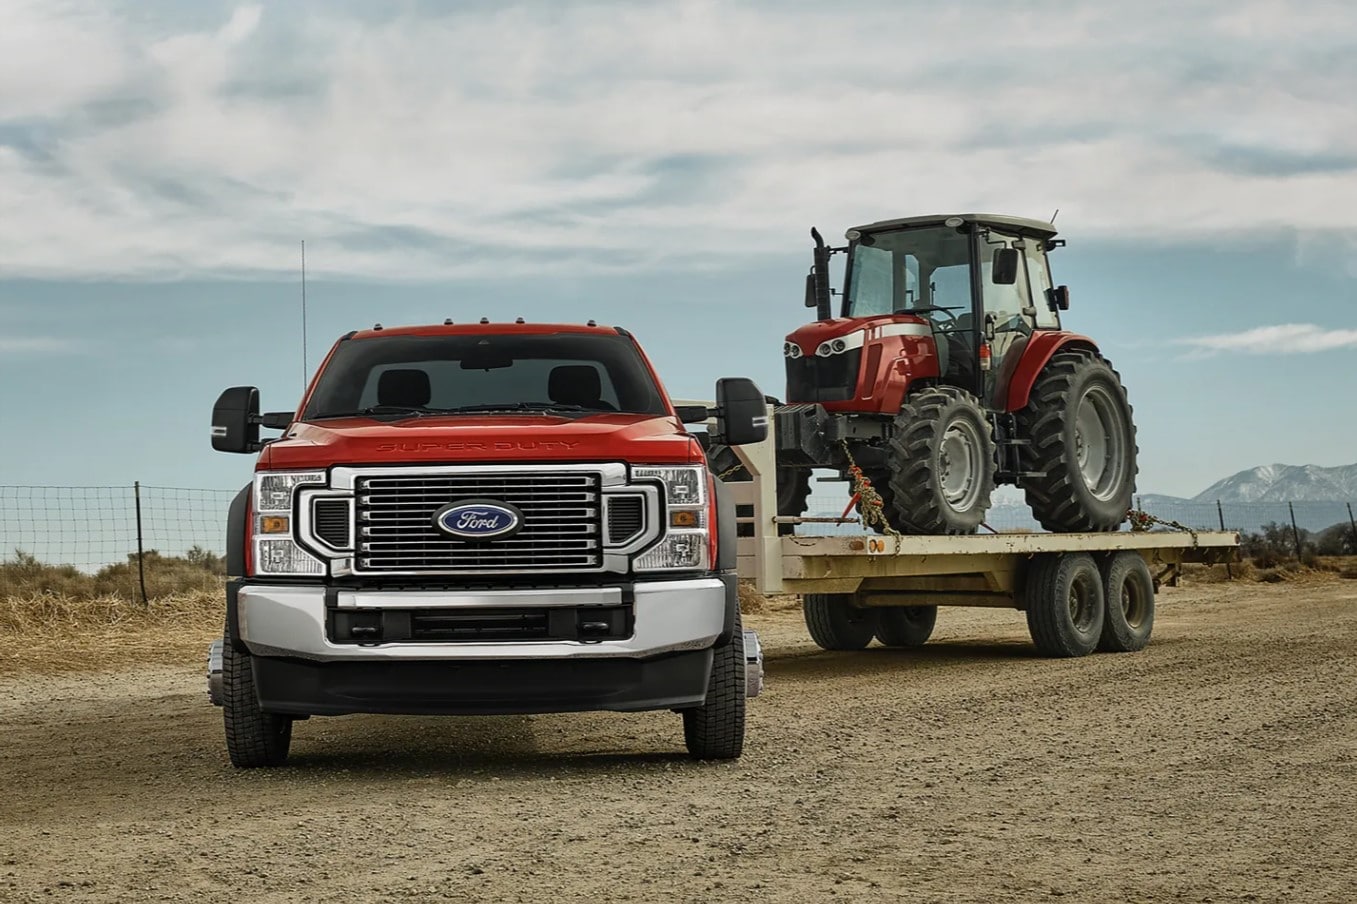 A new Ford Super Duty pulling a tractor